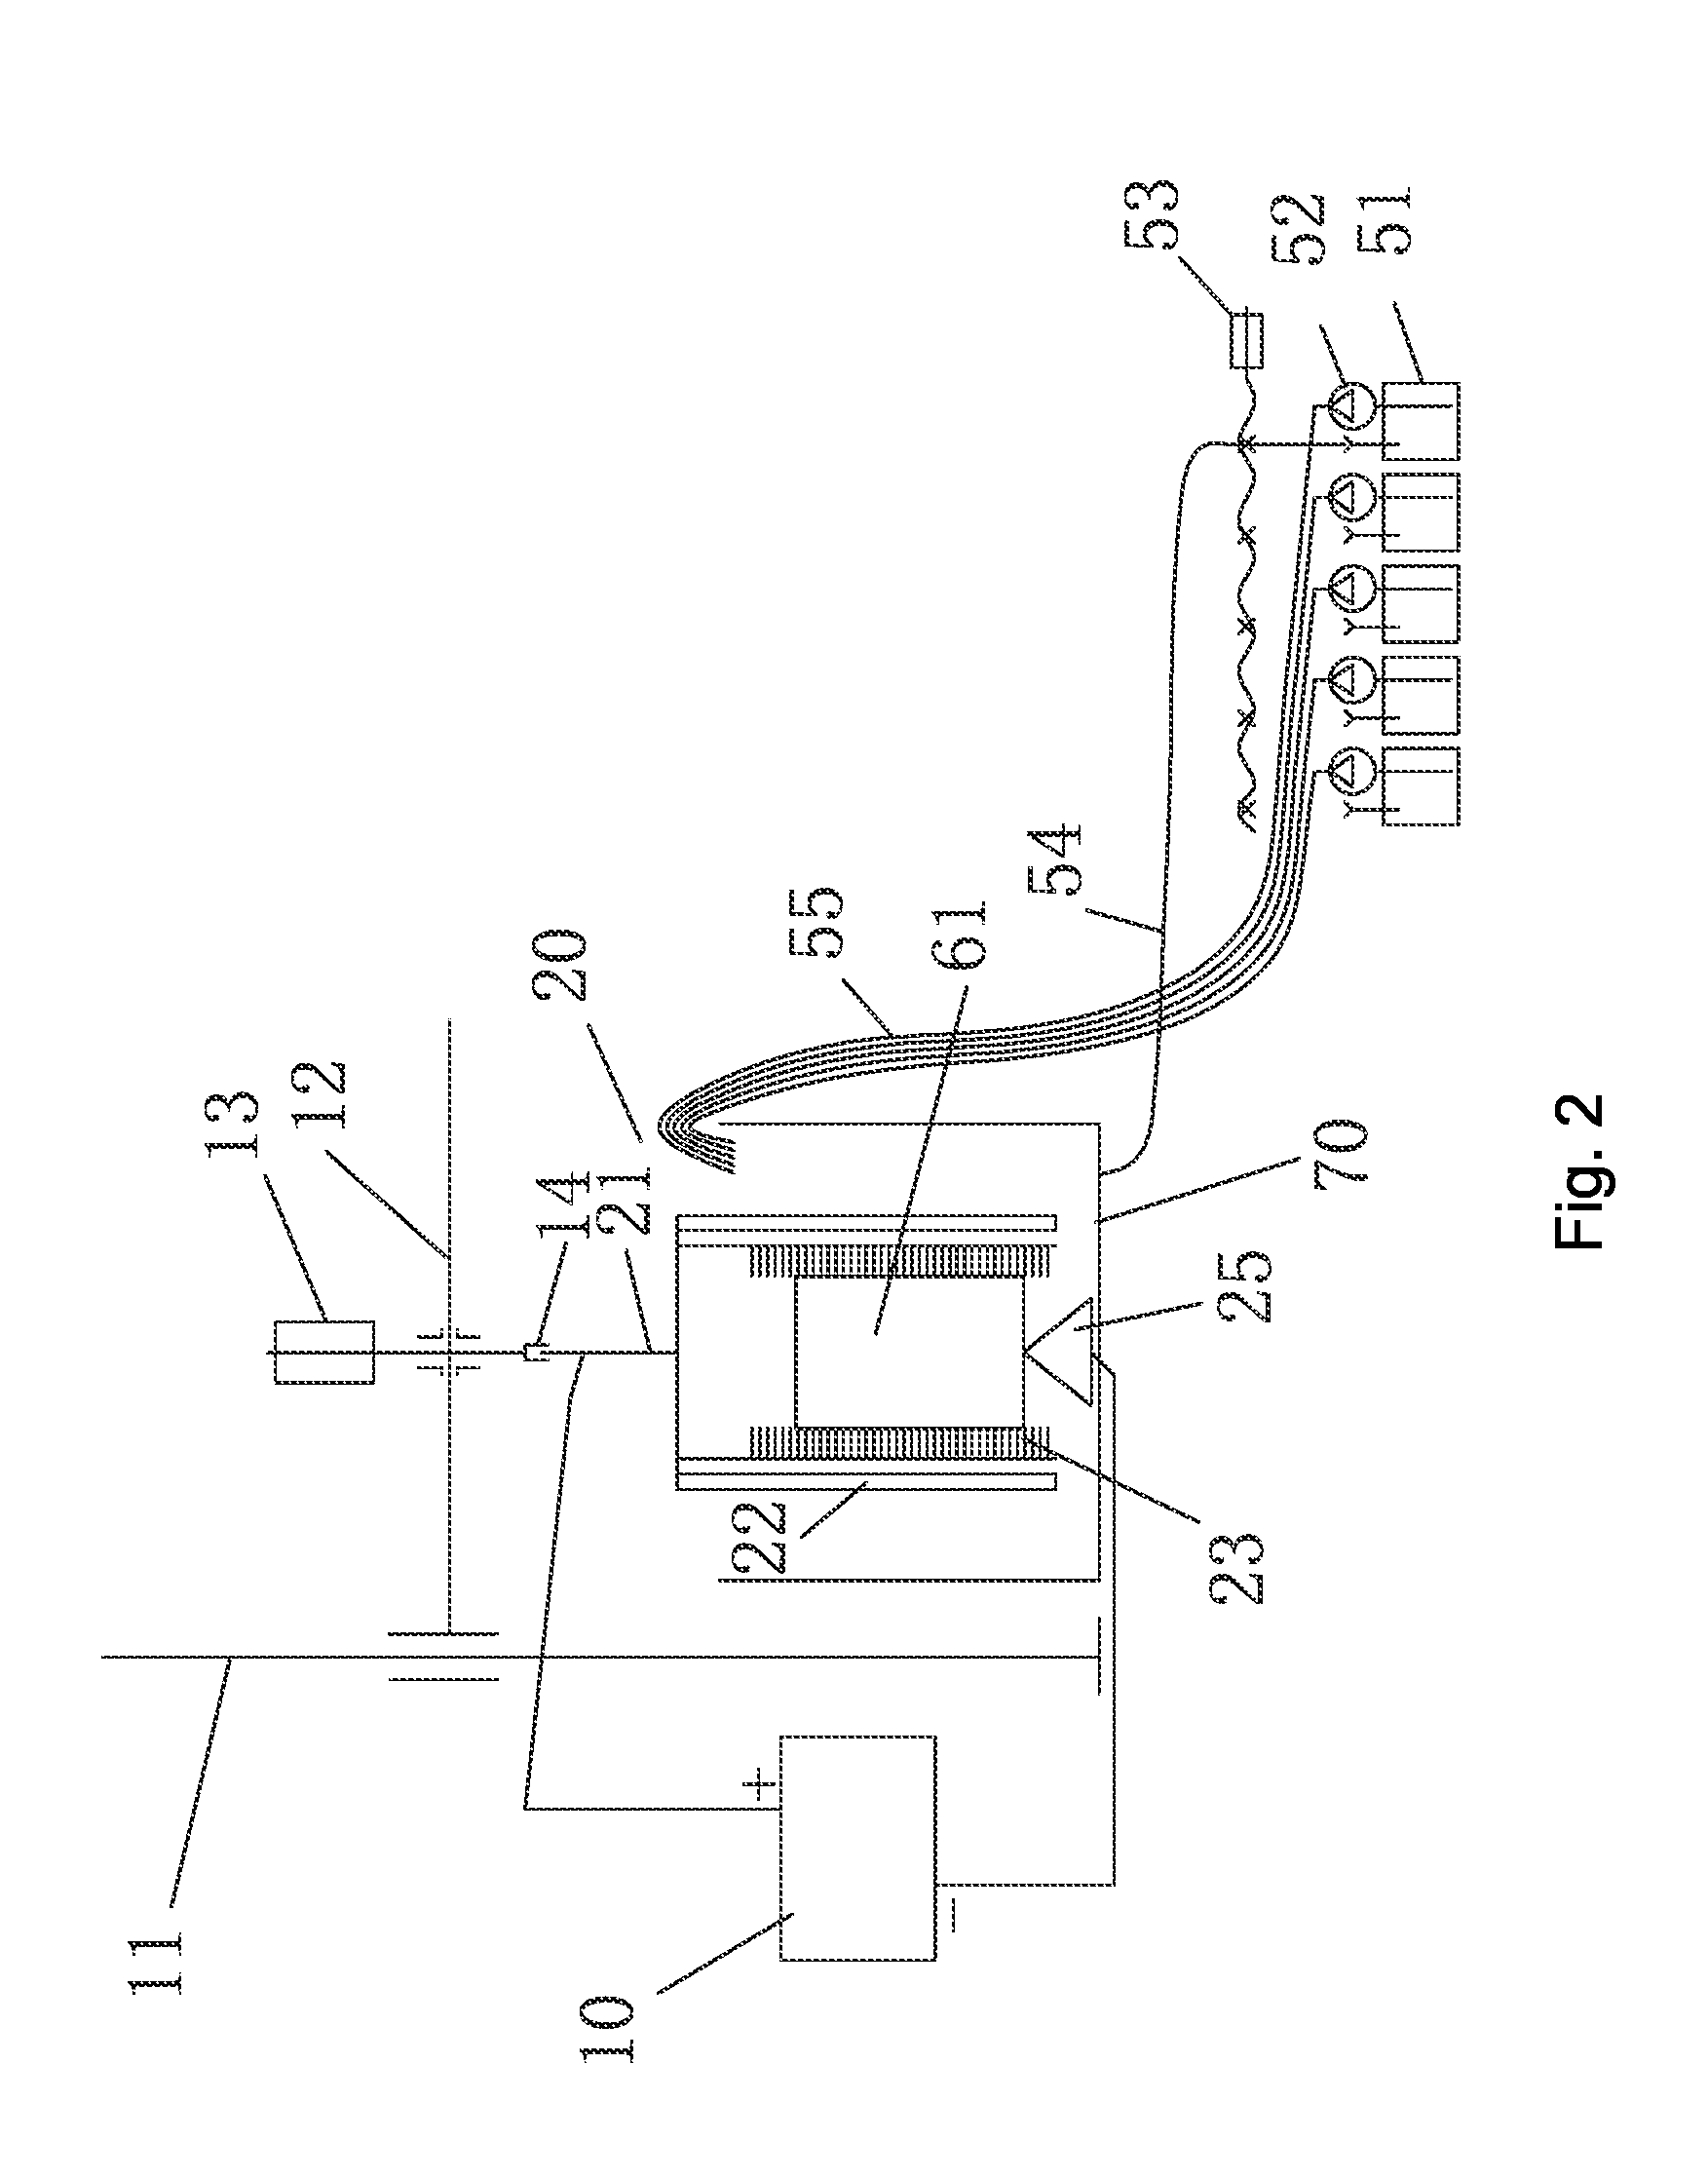 Electrical brush plating system and method for metal parts